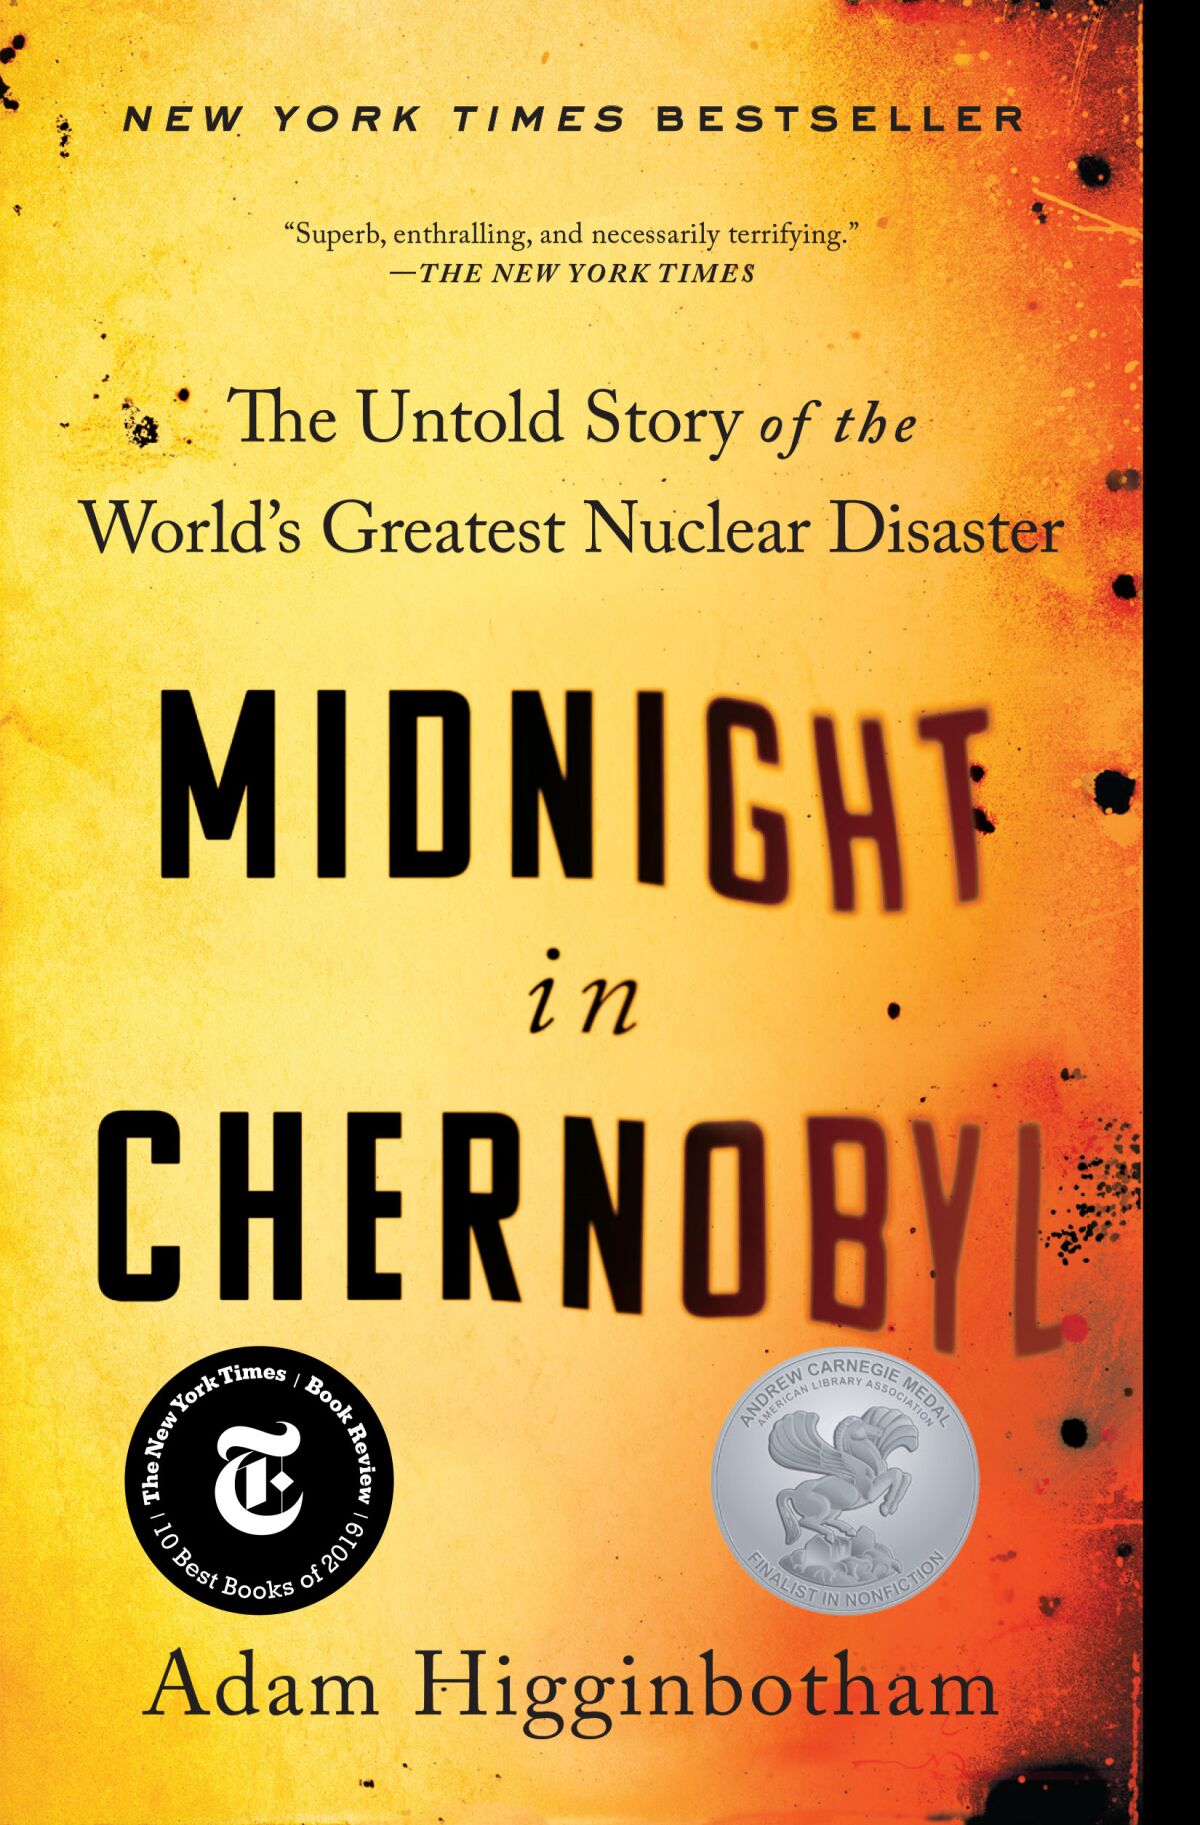 The cover of "Midnight in Chernobyl" 